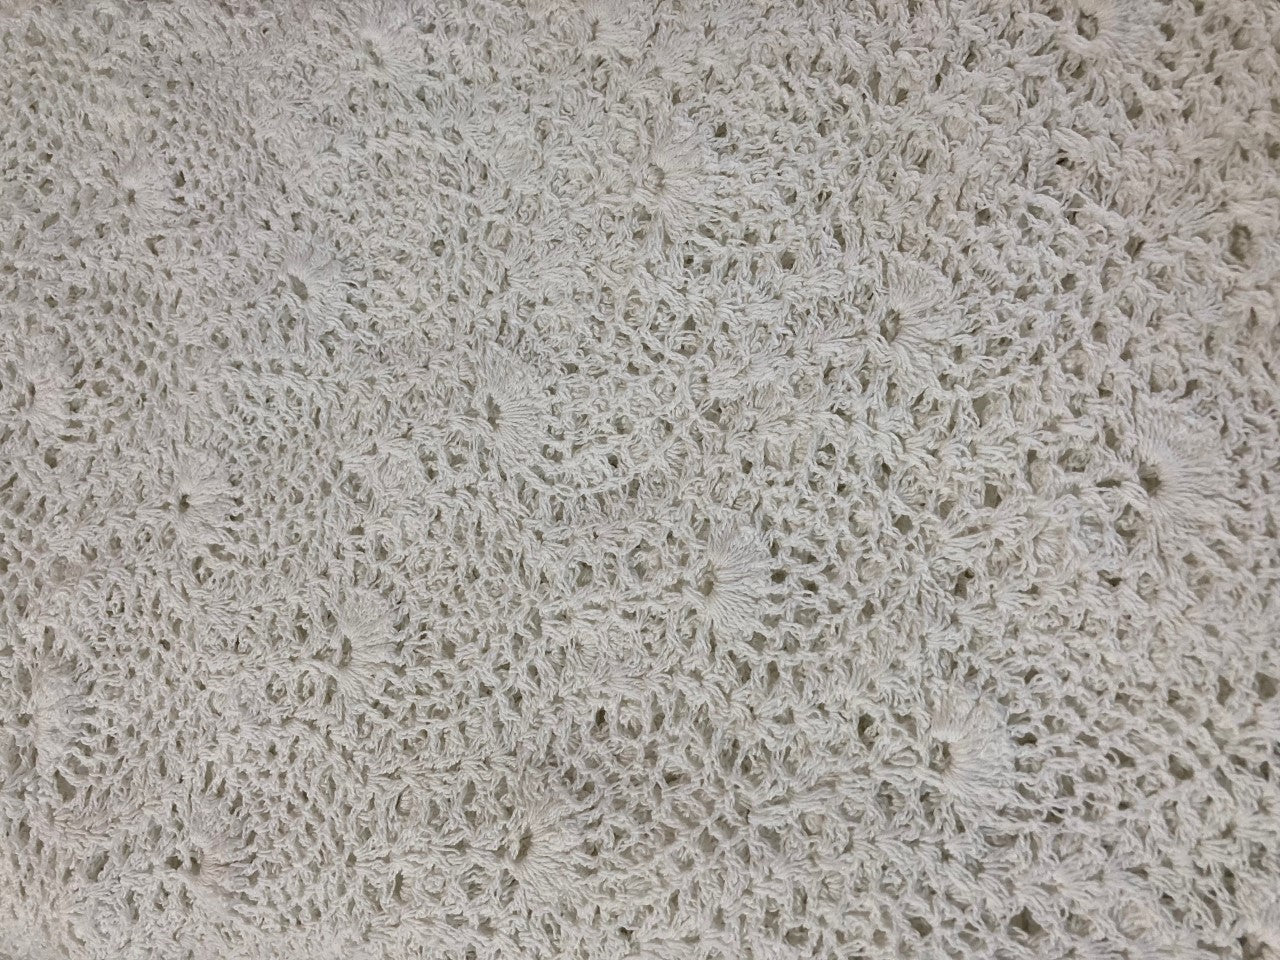 Hand Crochet Lace Tablecloth 70" Round White 100% Cotton Luxury